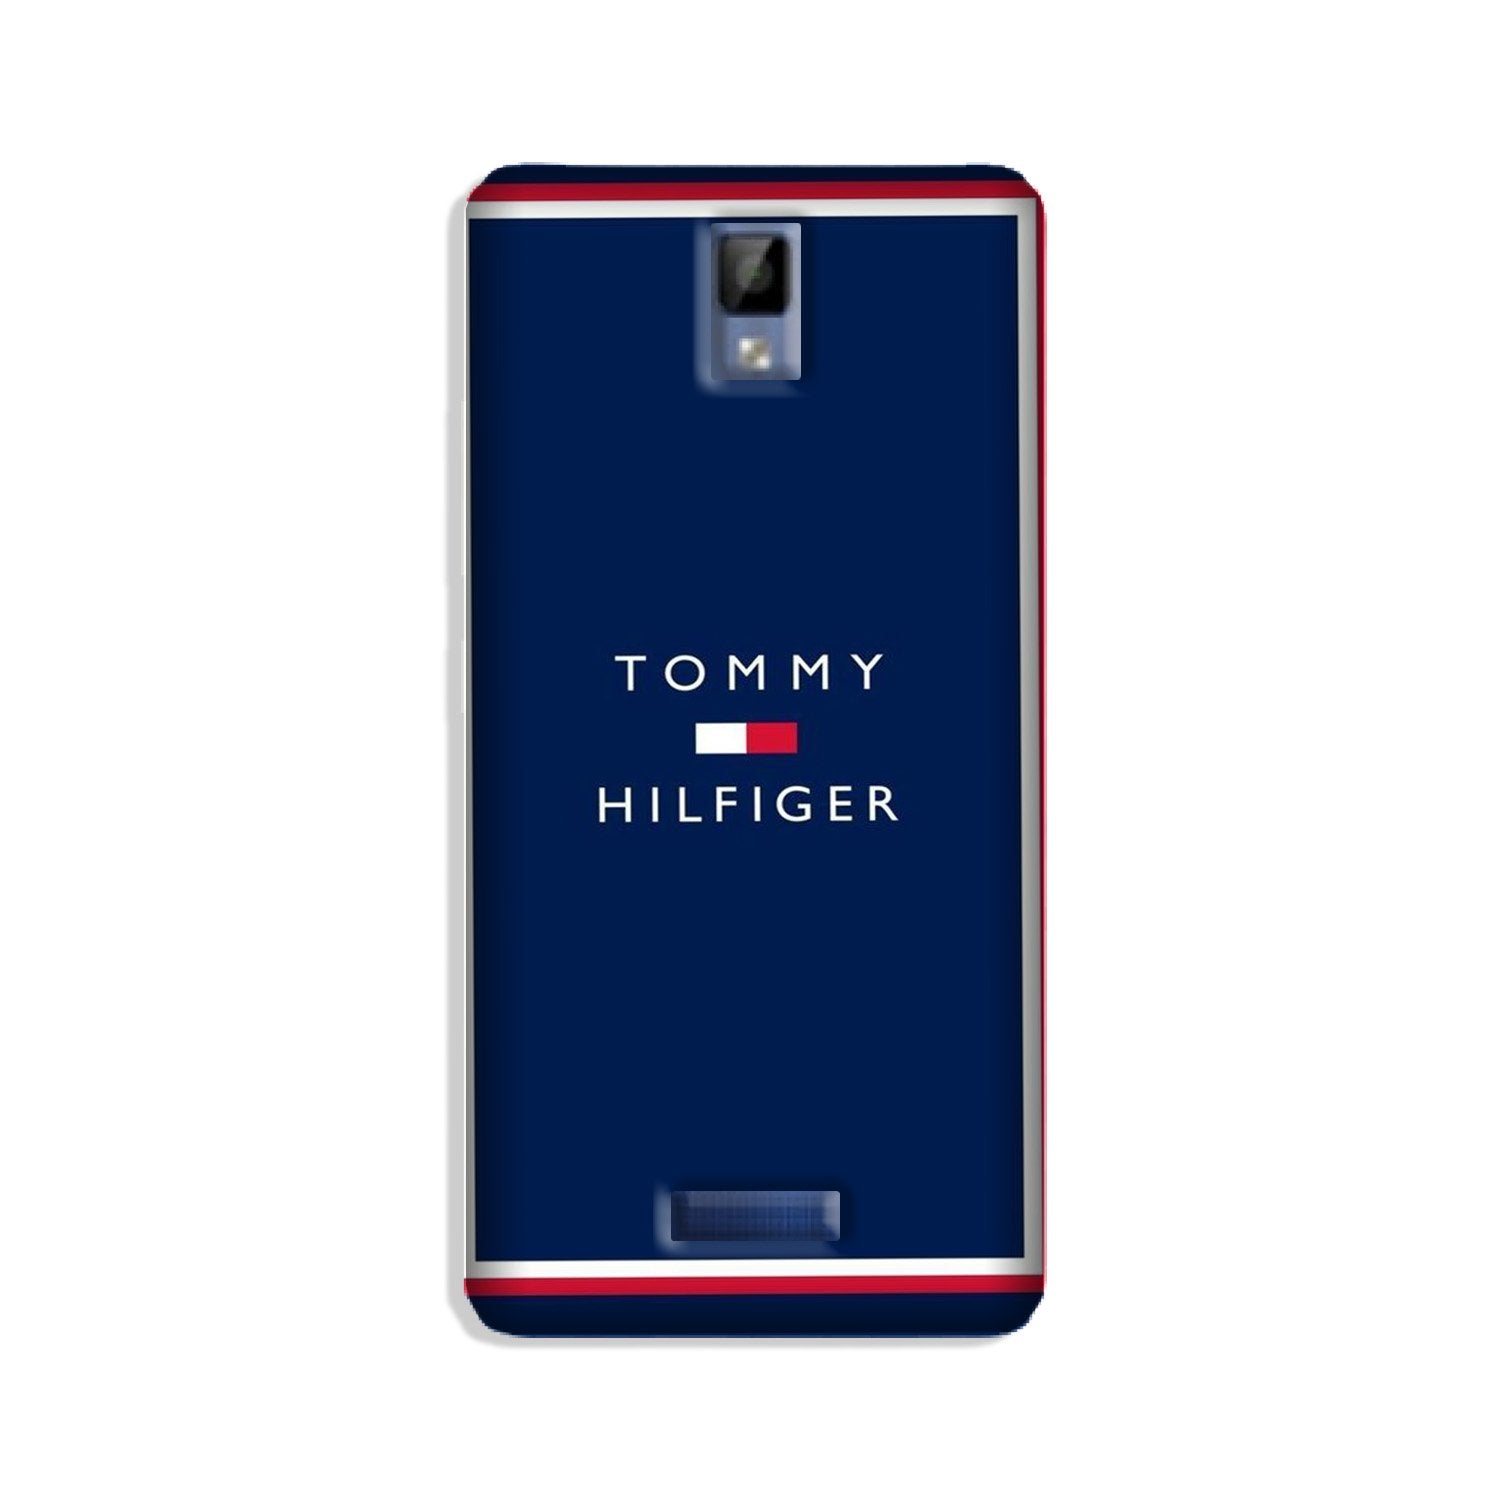 Tommy Hilfiger Case for Gionee P7 (Design No. 275)